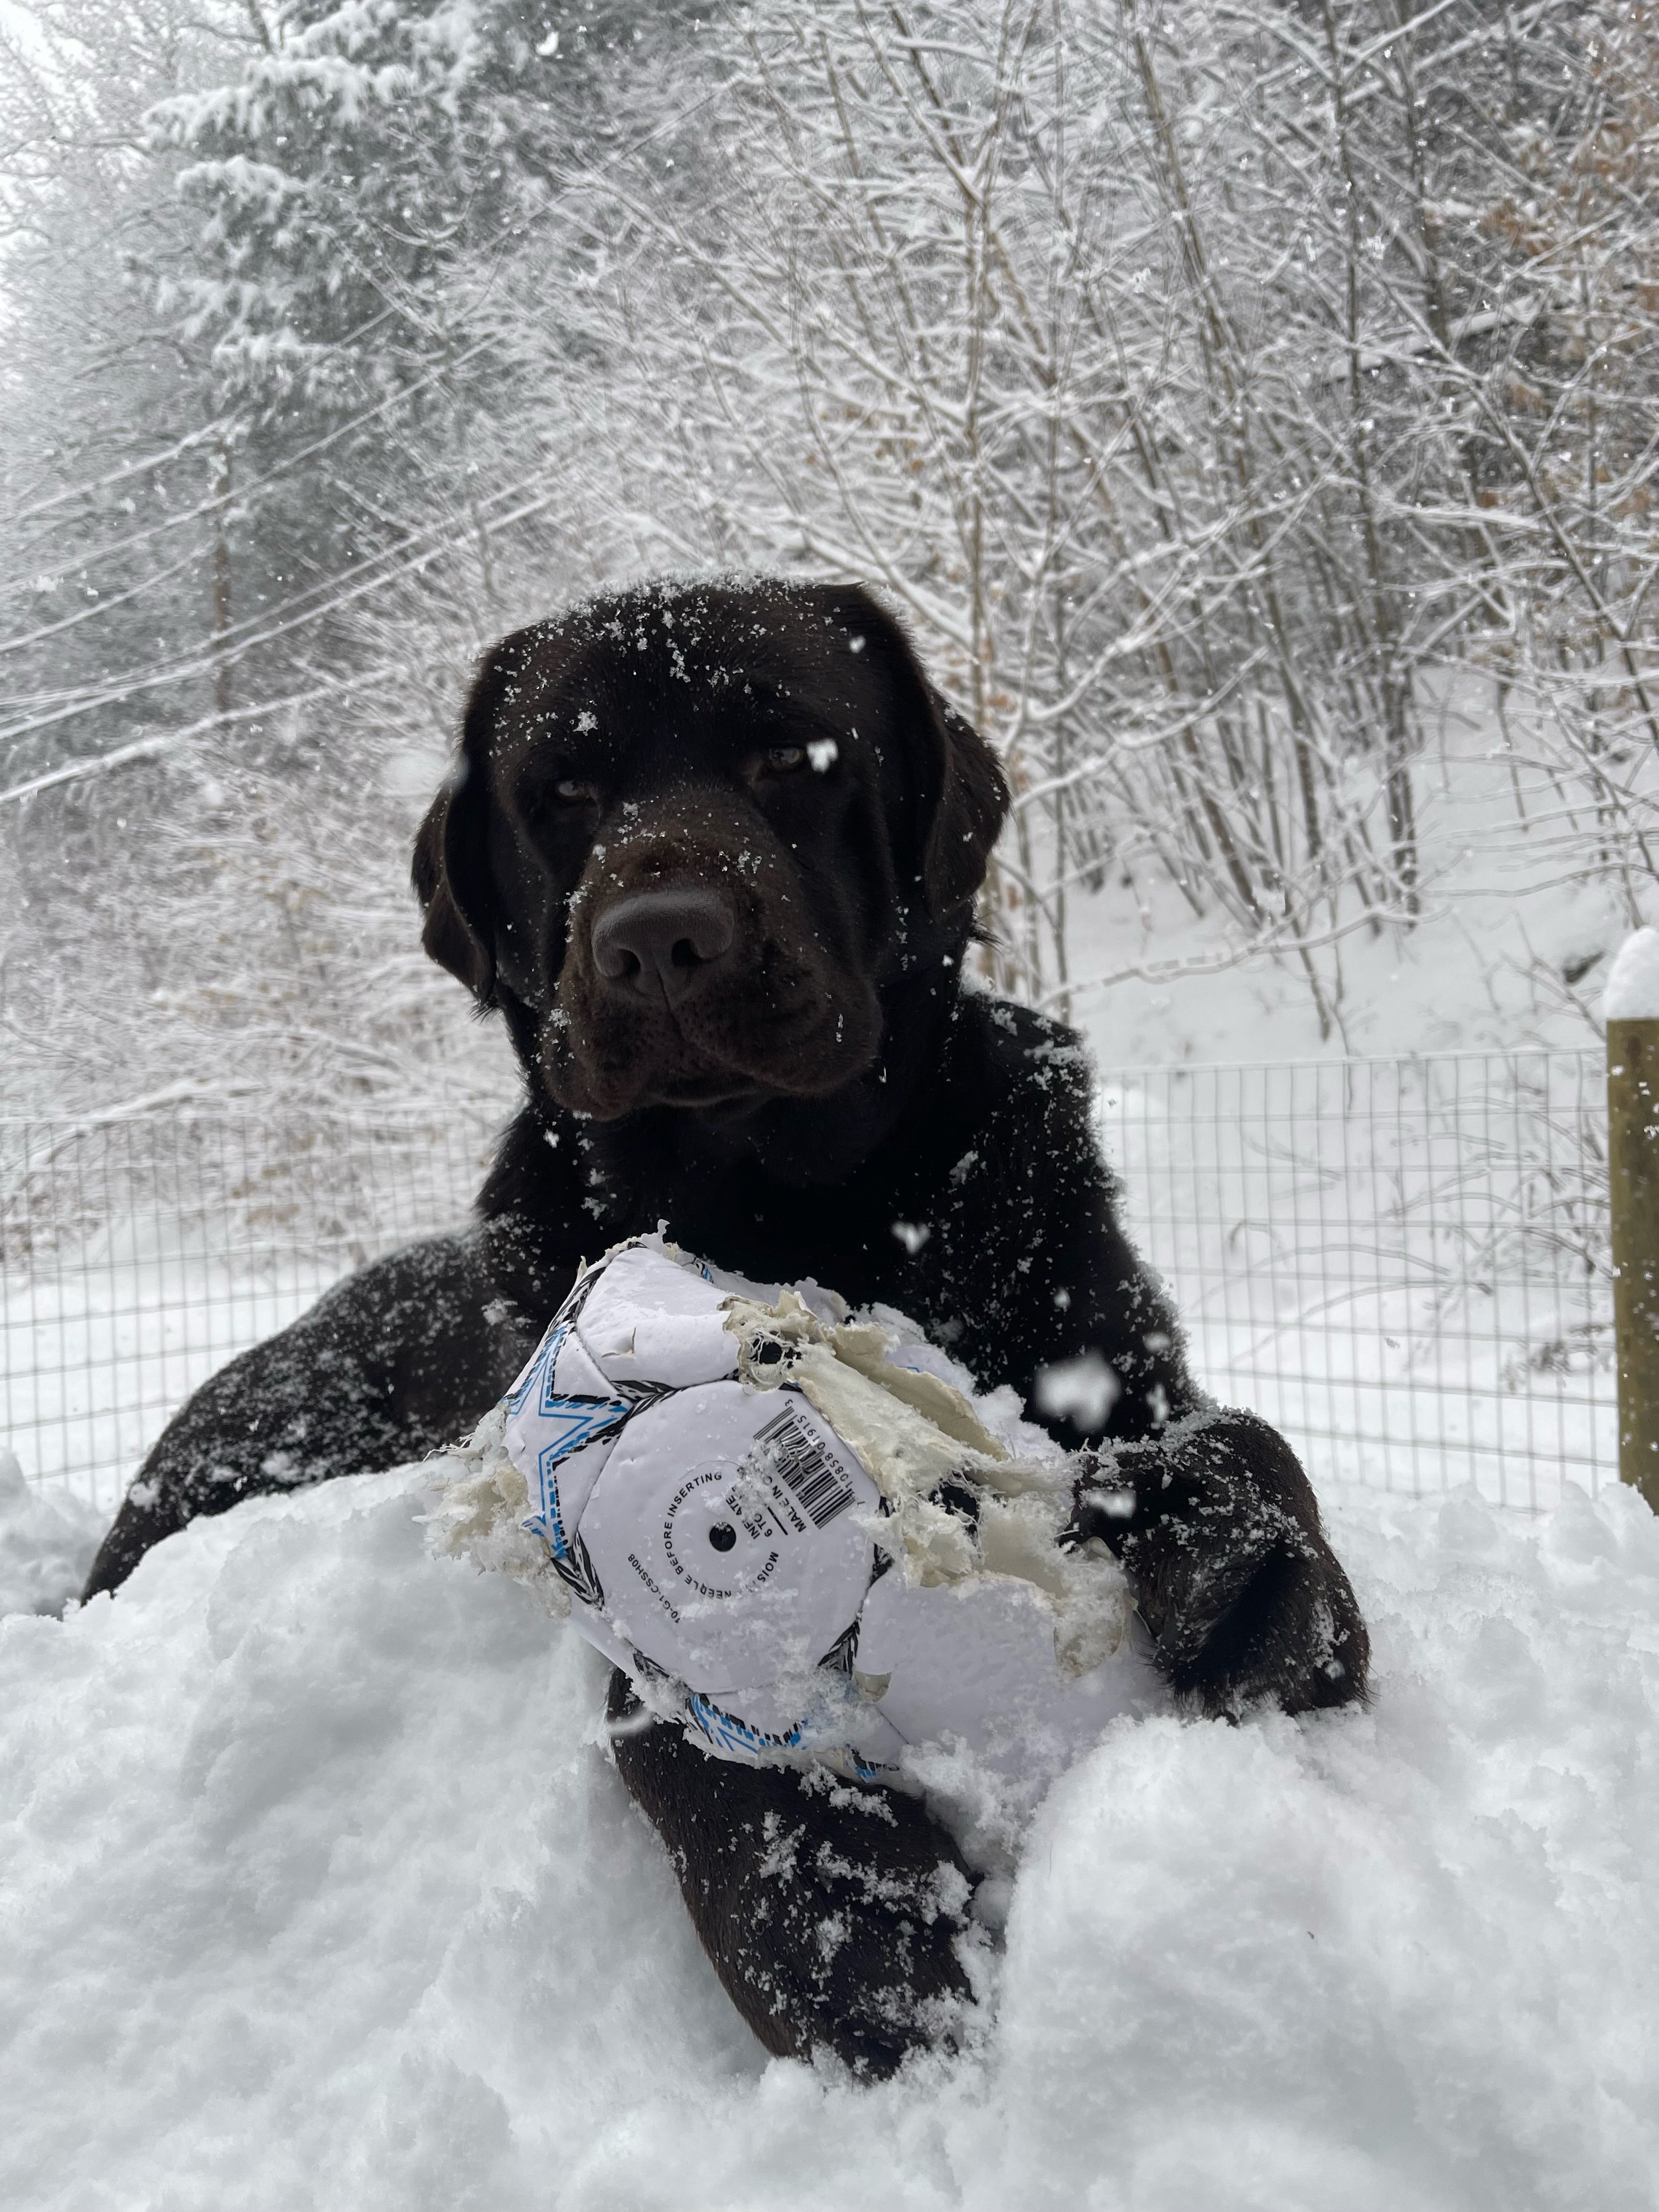   After several super-cold days cooped up indoors, Jameson, a young chocolate lab, gets a snowy workout with his well-loved soccer ball in Duxbury. Photo by Jamie O'Donnell  